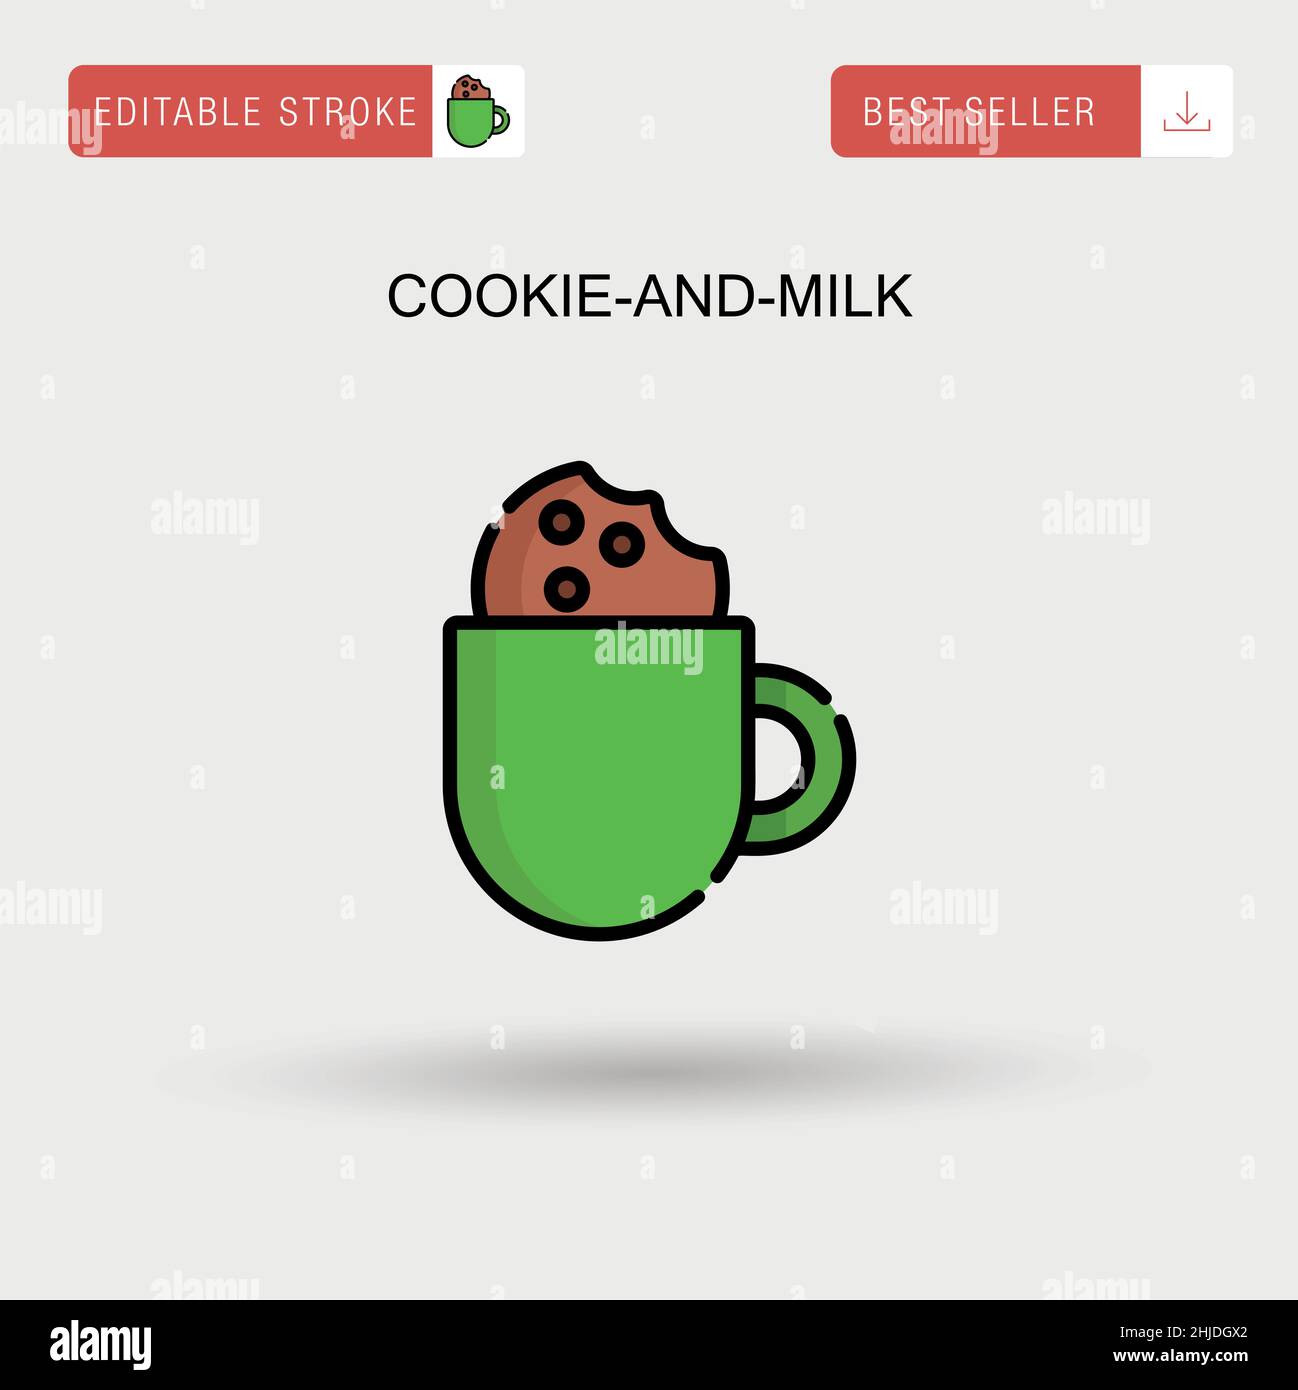 Cookie-and-milk Simple vector icon. Stock Vector